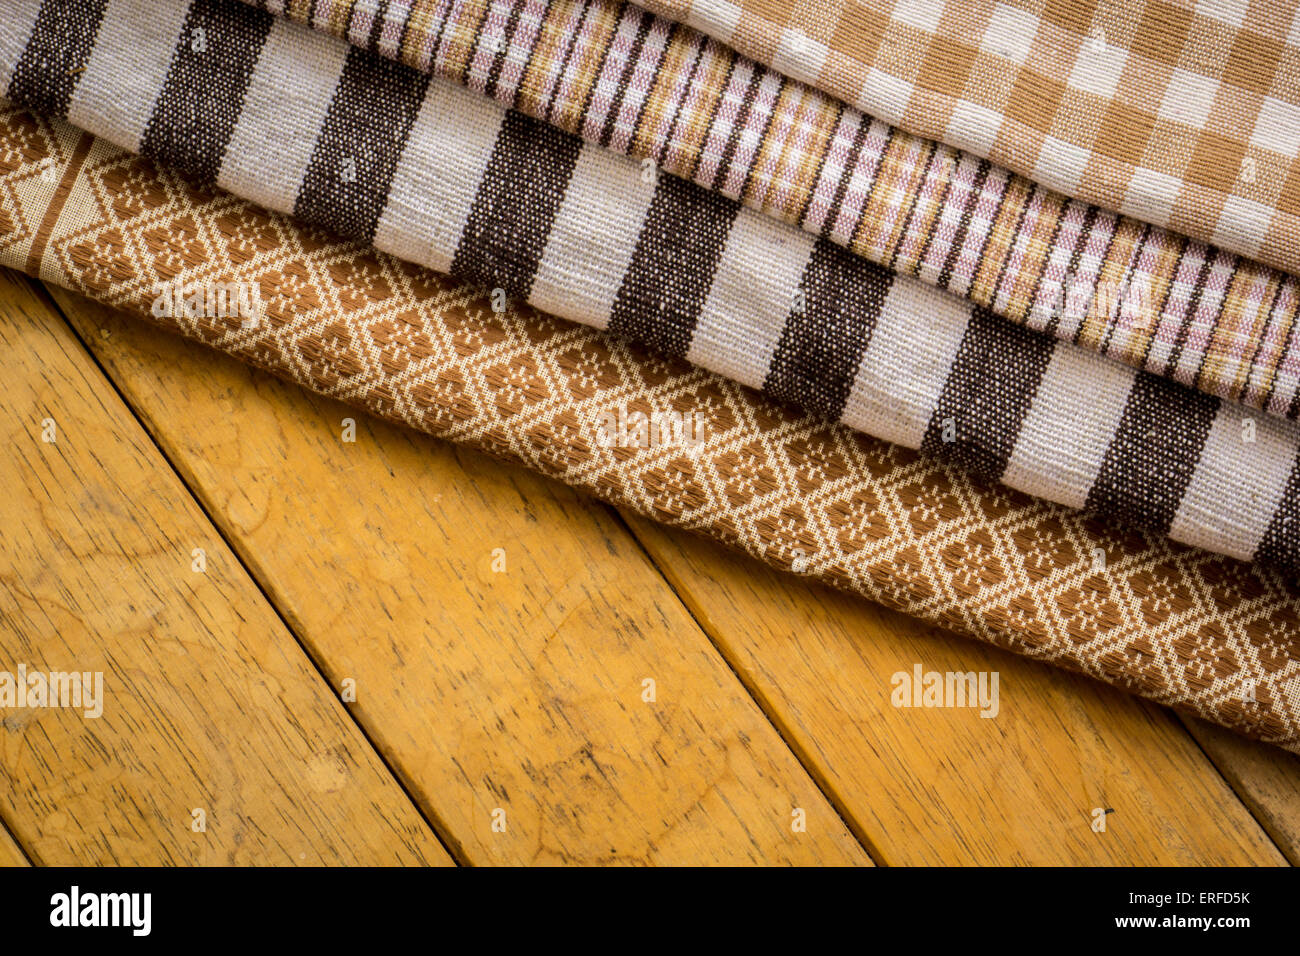 background,  brown, chequered, clean, cloth, color, colorful, cotton, fabric, folded, home, horizontal, Stock Photo